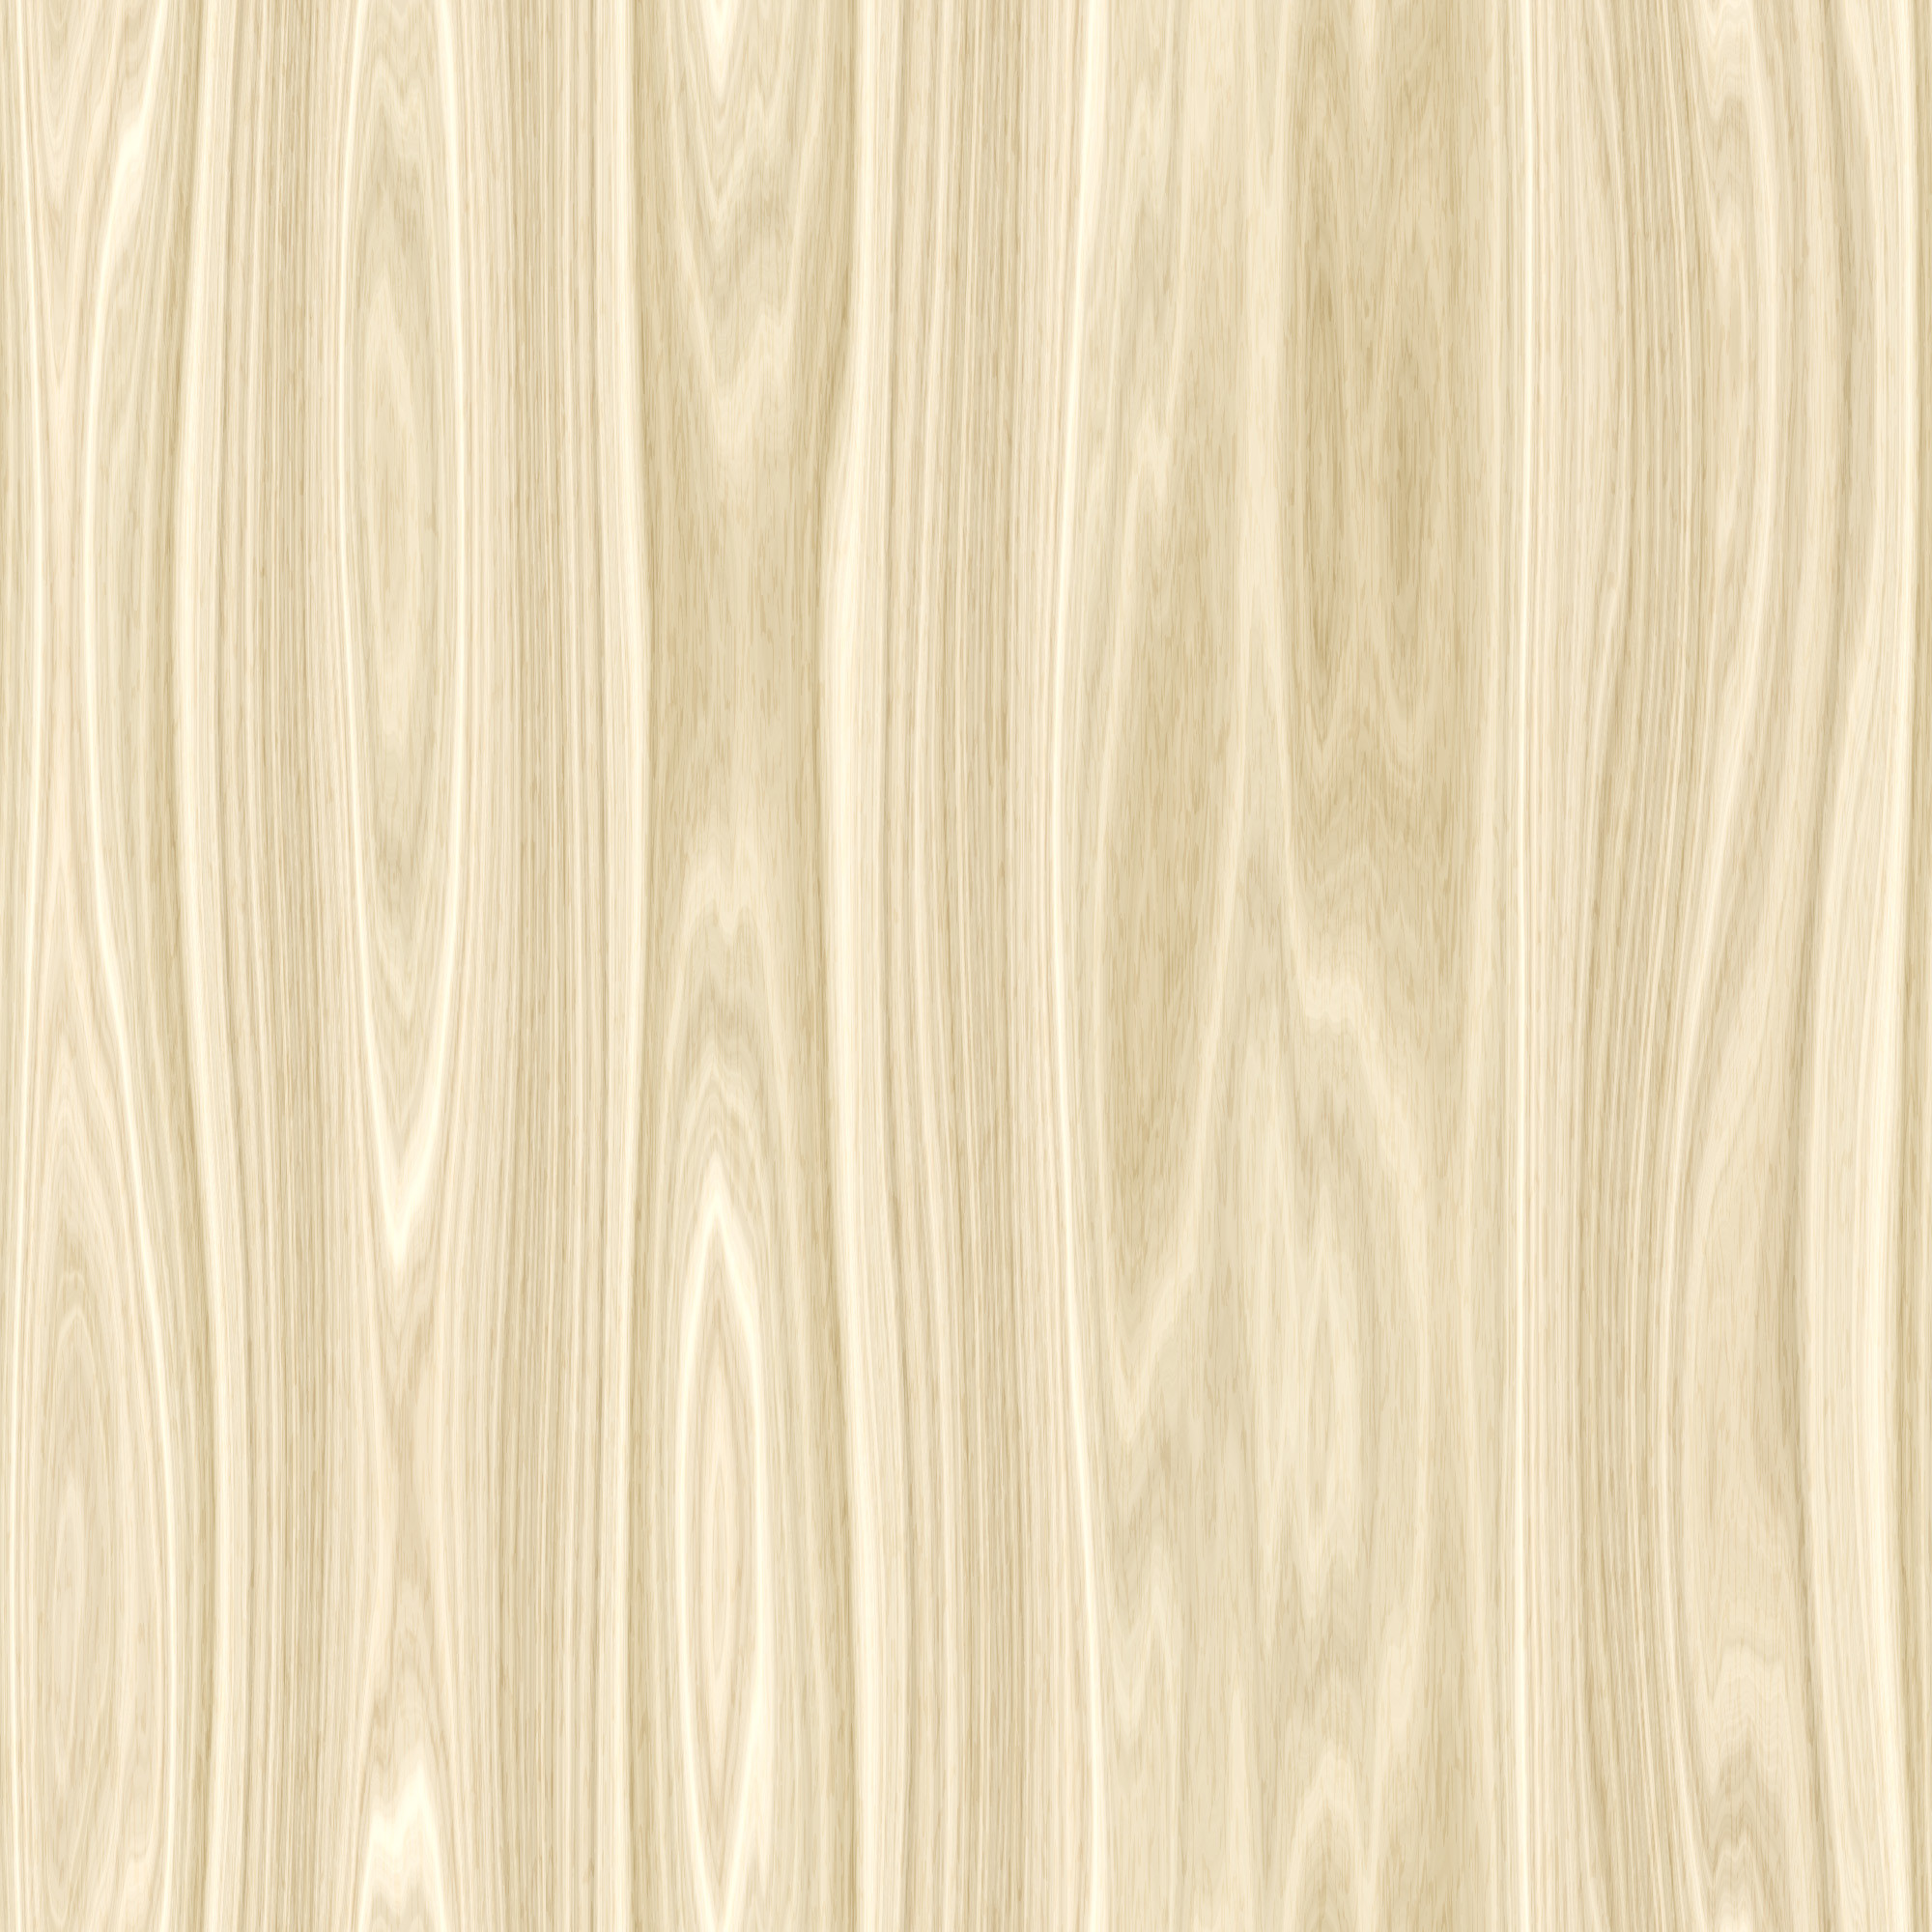 2000x2000 white background seamless wood texture | www.myfreetextures.com | 1500 .